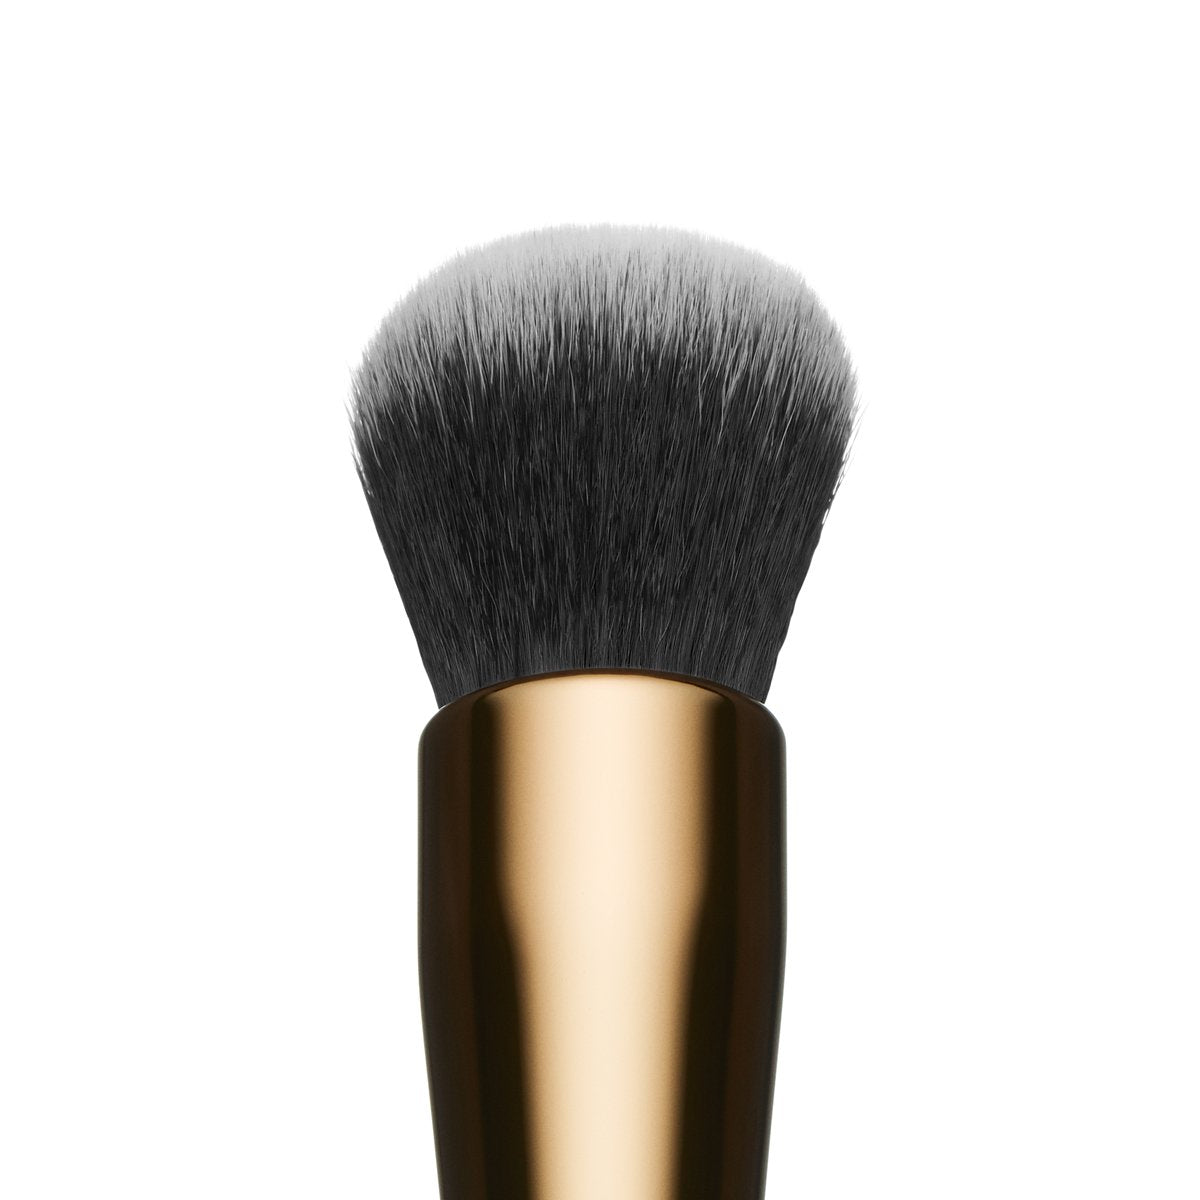 Load image into Gallery viewer, Pat McGrath LABS Sublime Perfection Foundation Brush
